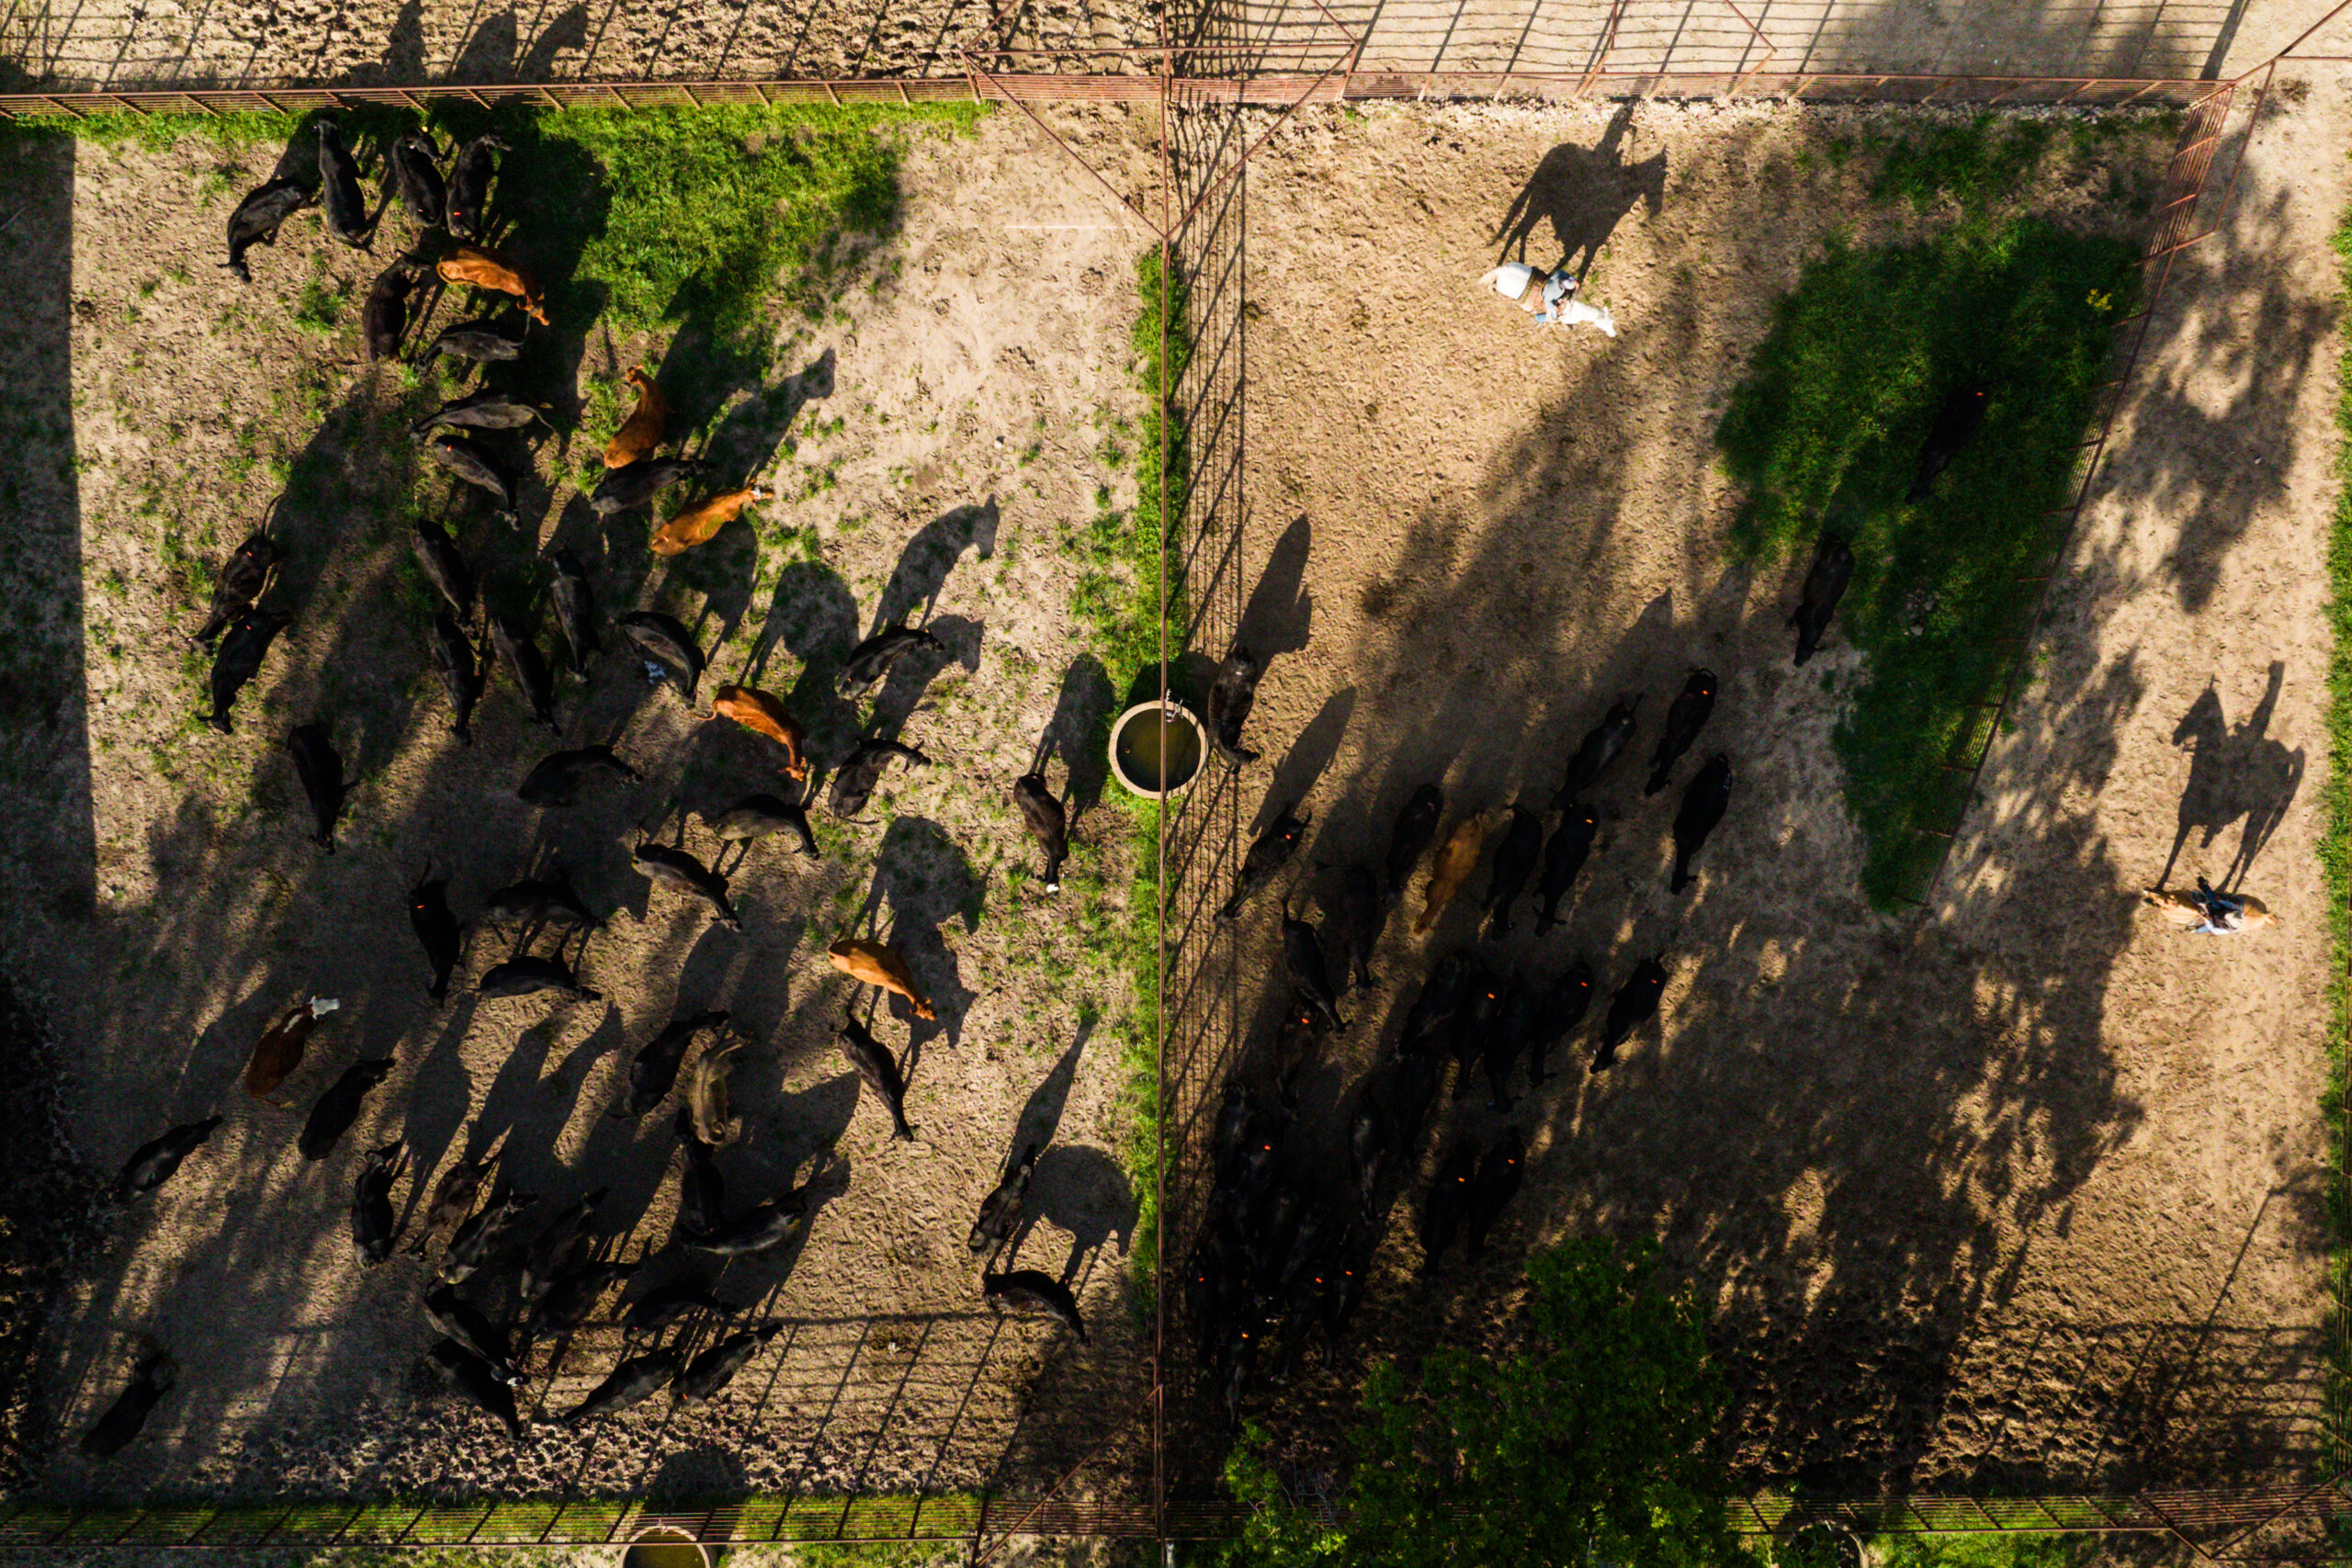 Overhead view of cattle being penned by two riders on horseback